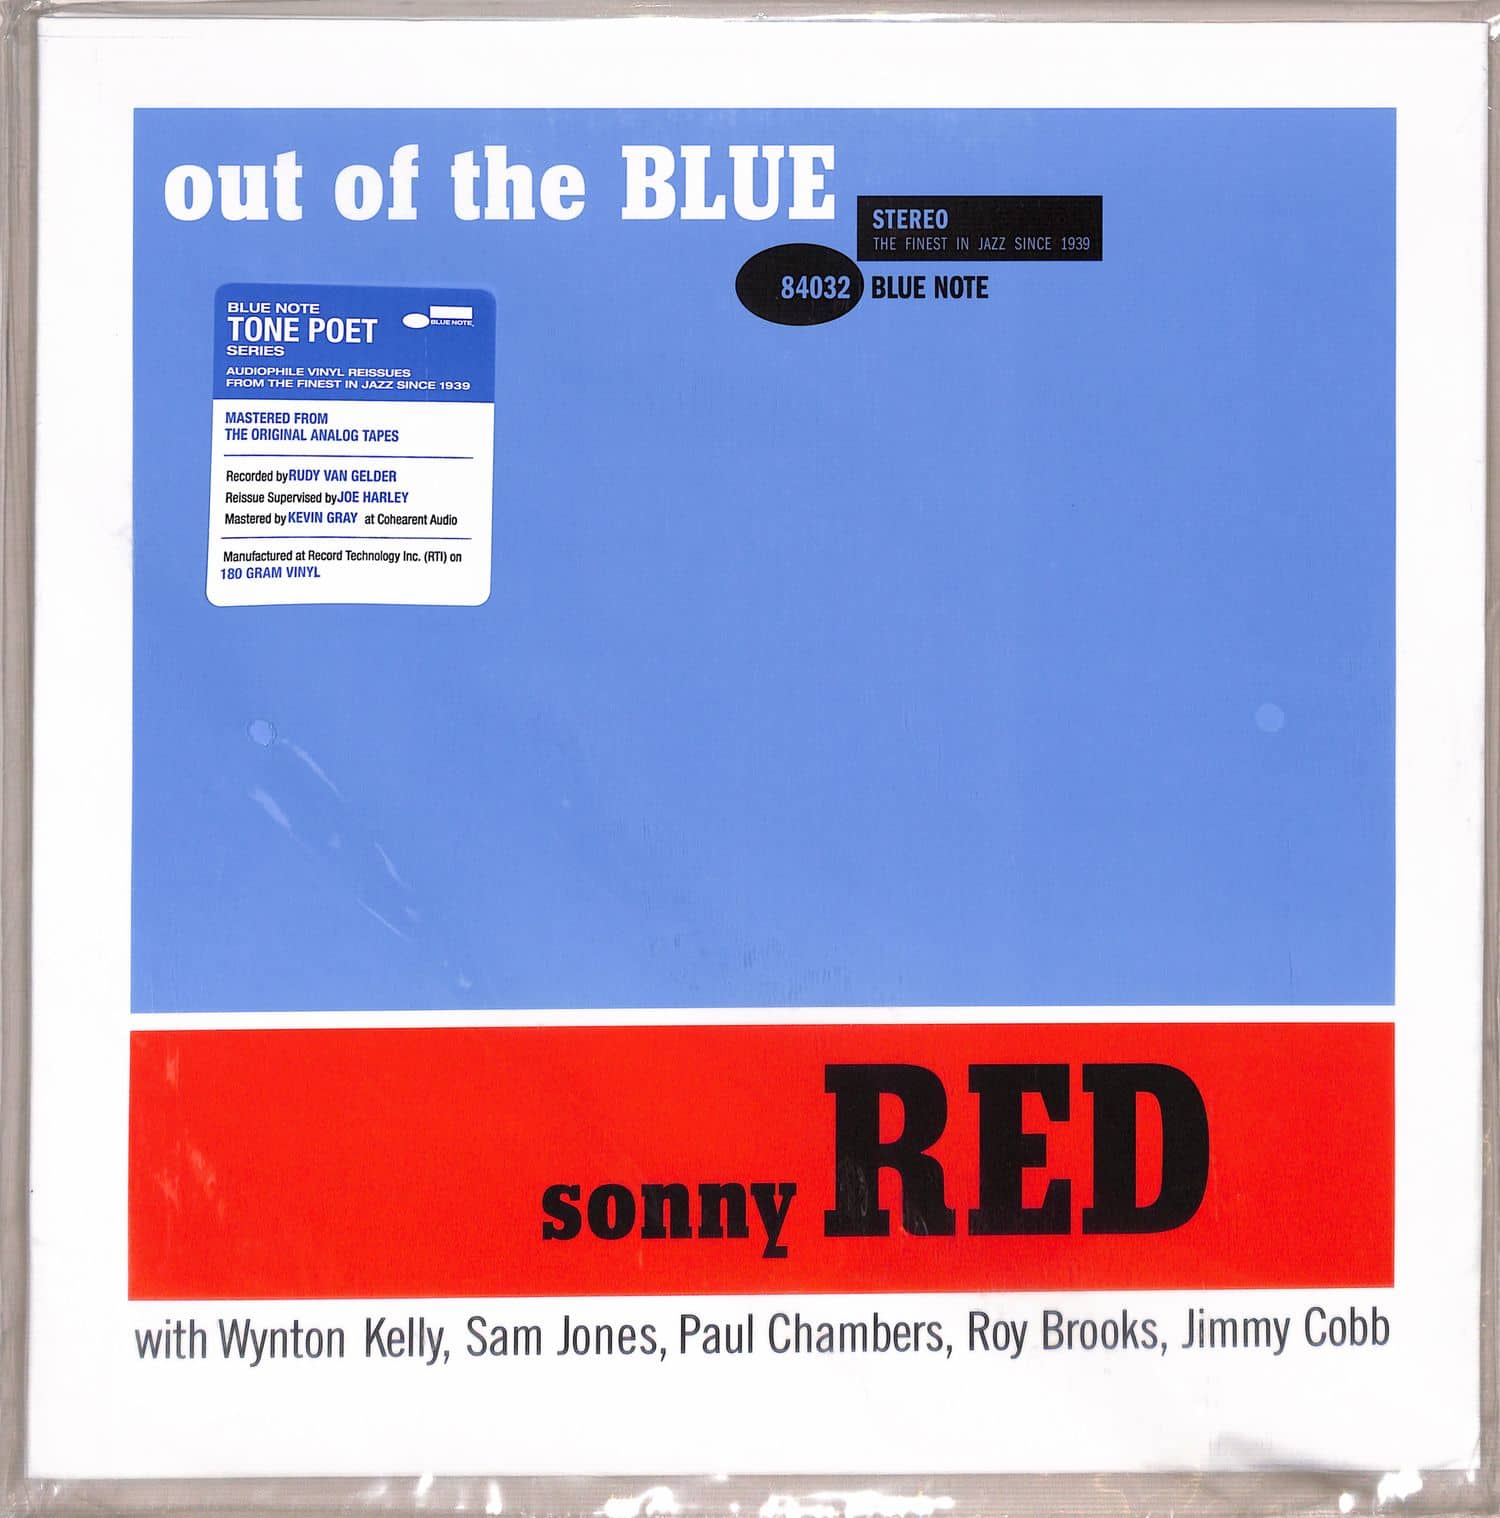 Sonny Red - OUT OF THE BLUE 